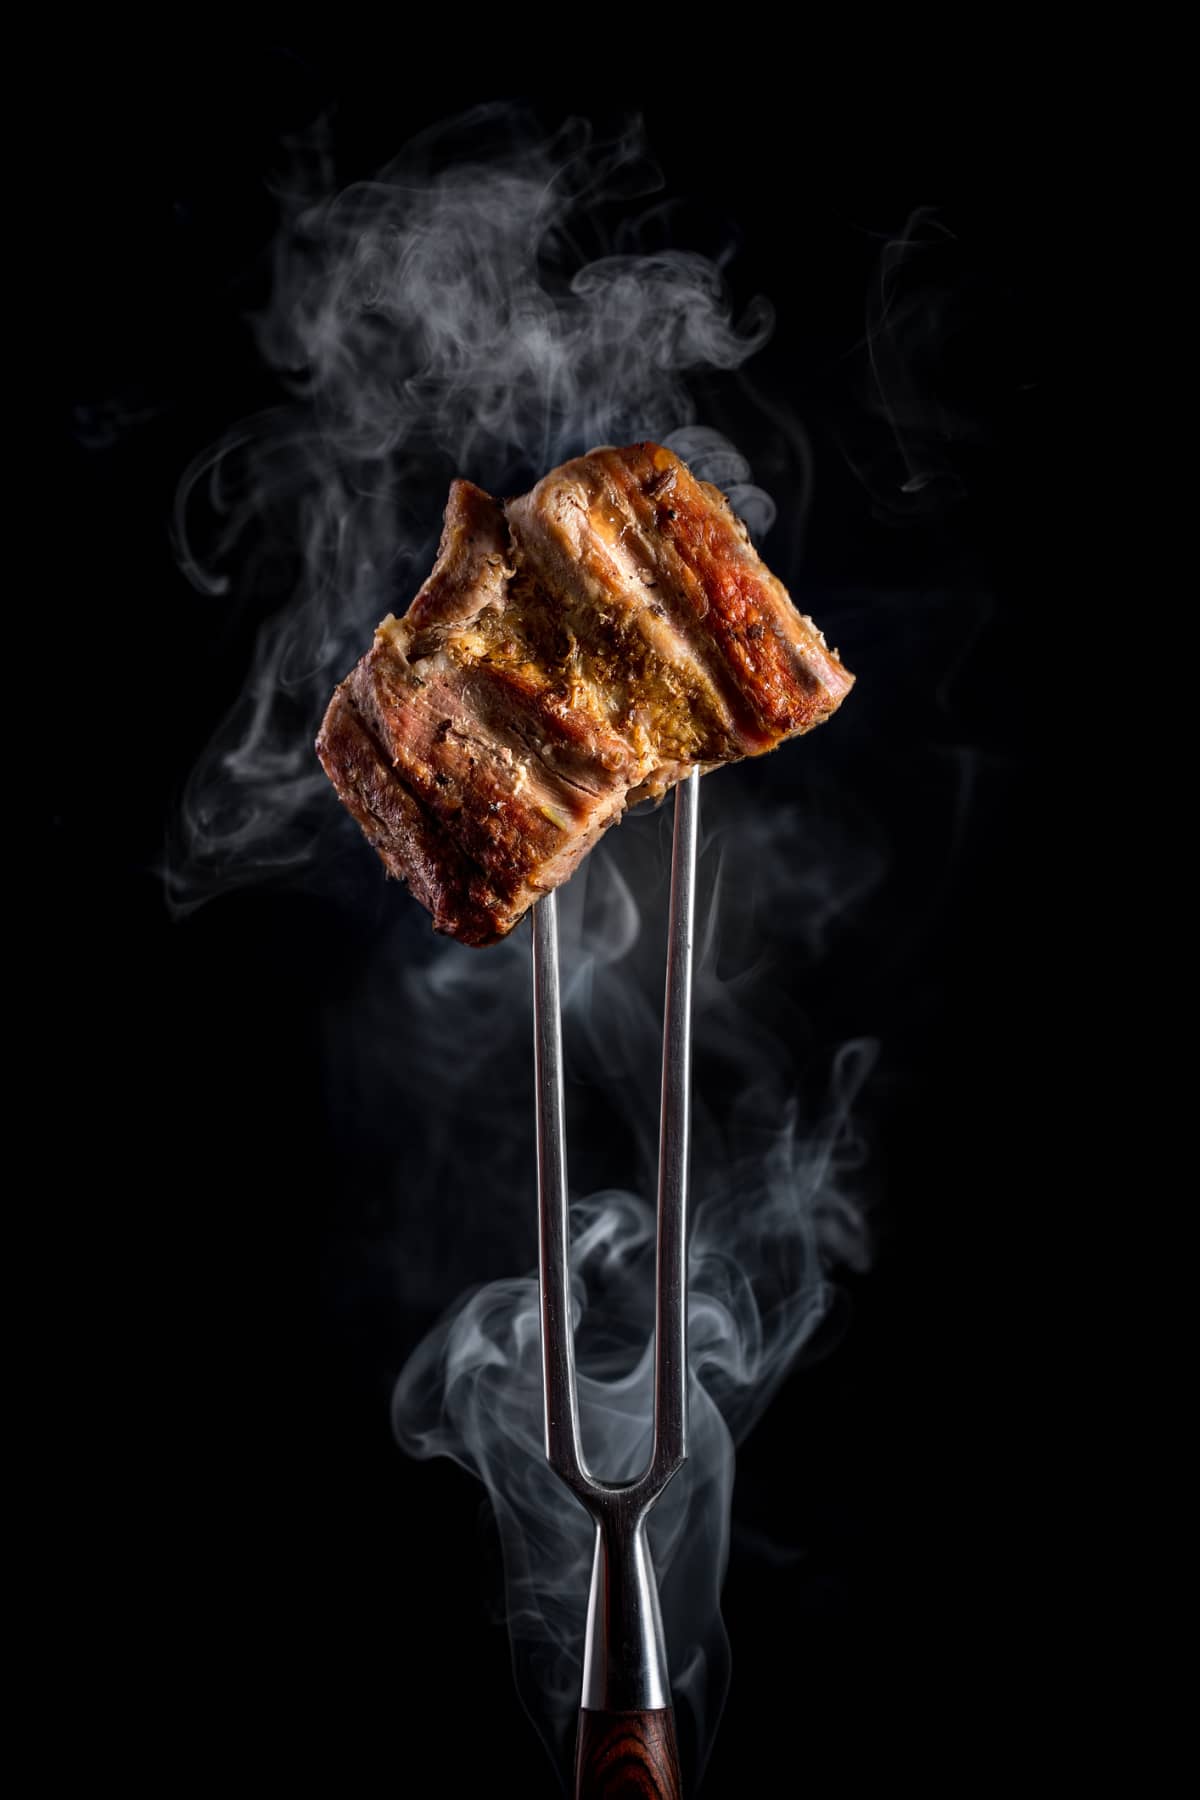 A fork holding barbecued meat on black background